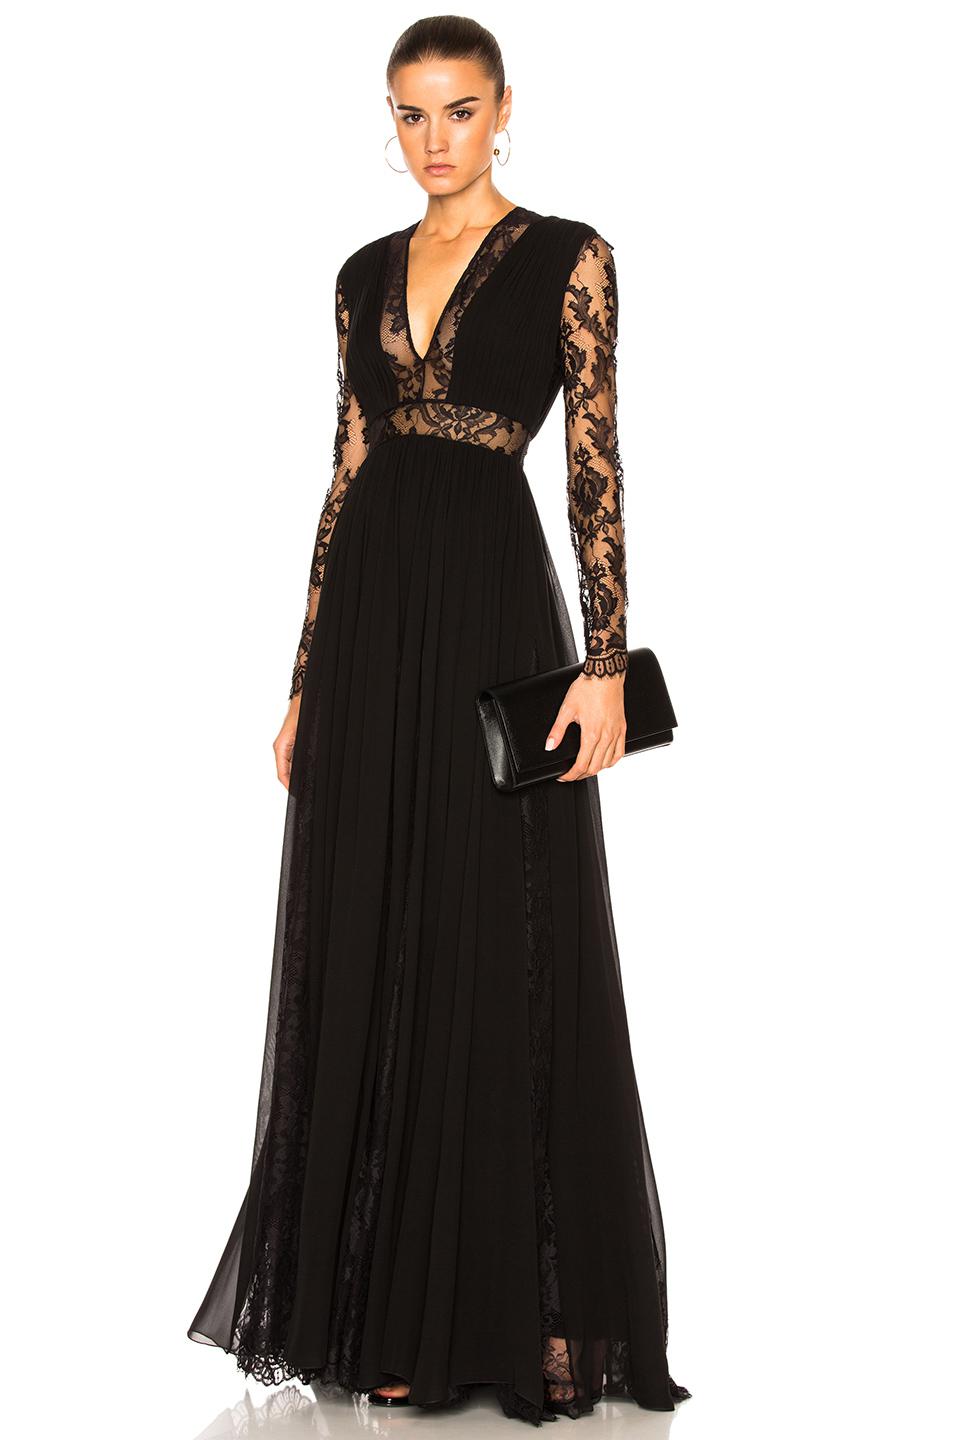 Lyst - Zuhair Murad Georgette & Lace V Neck Gown in Black